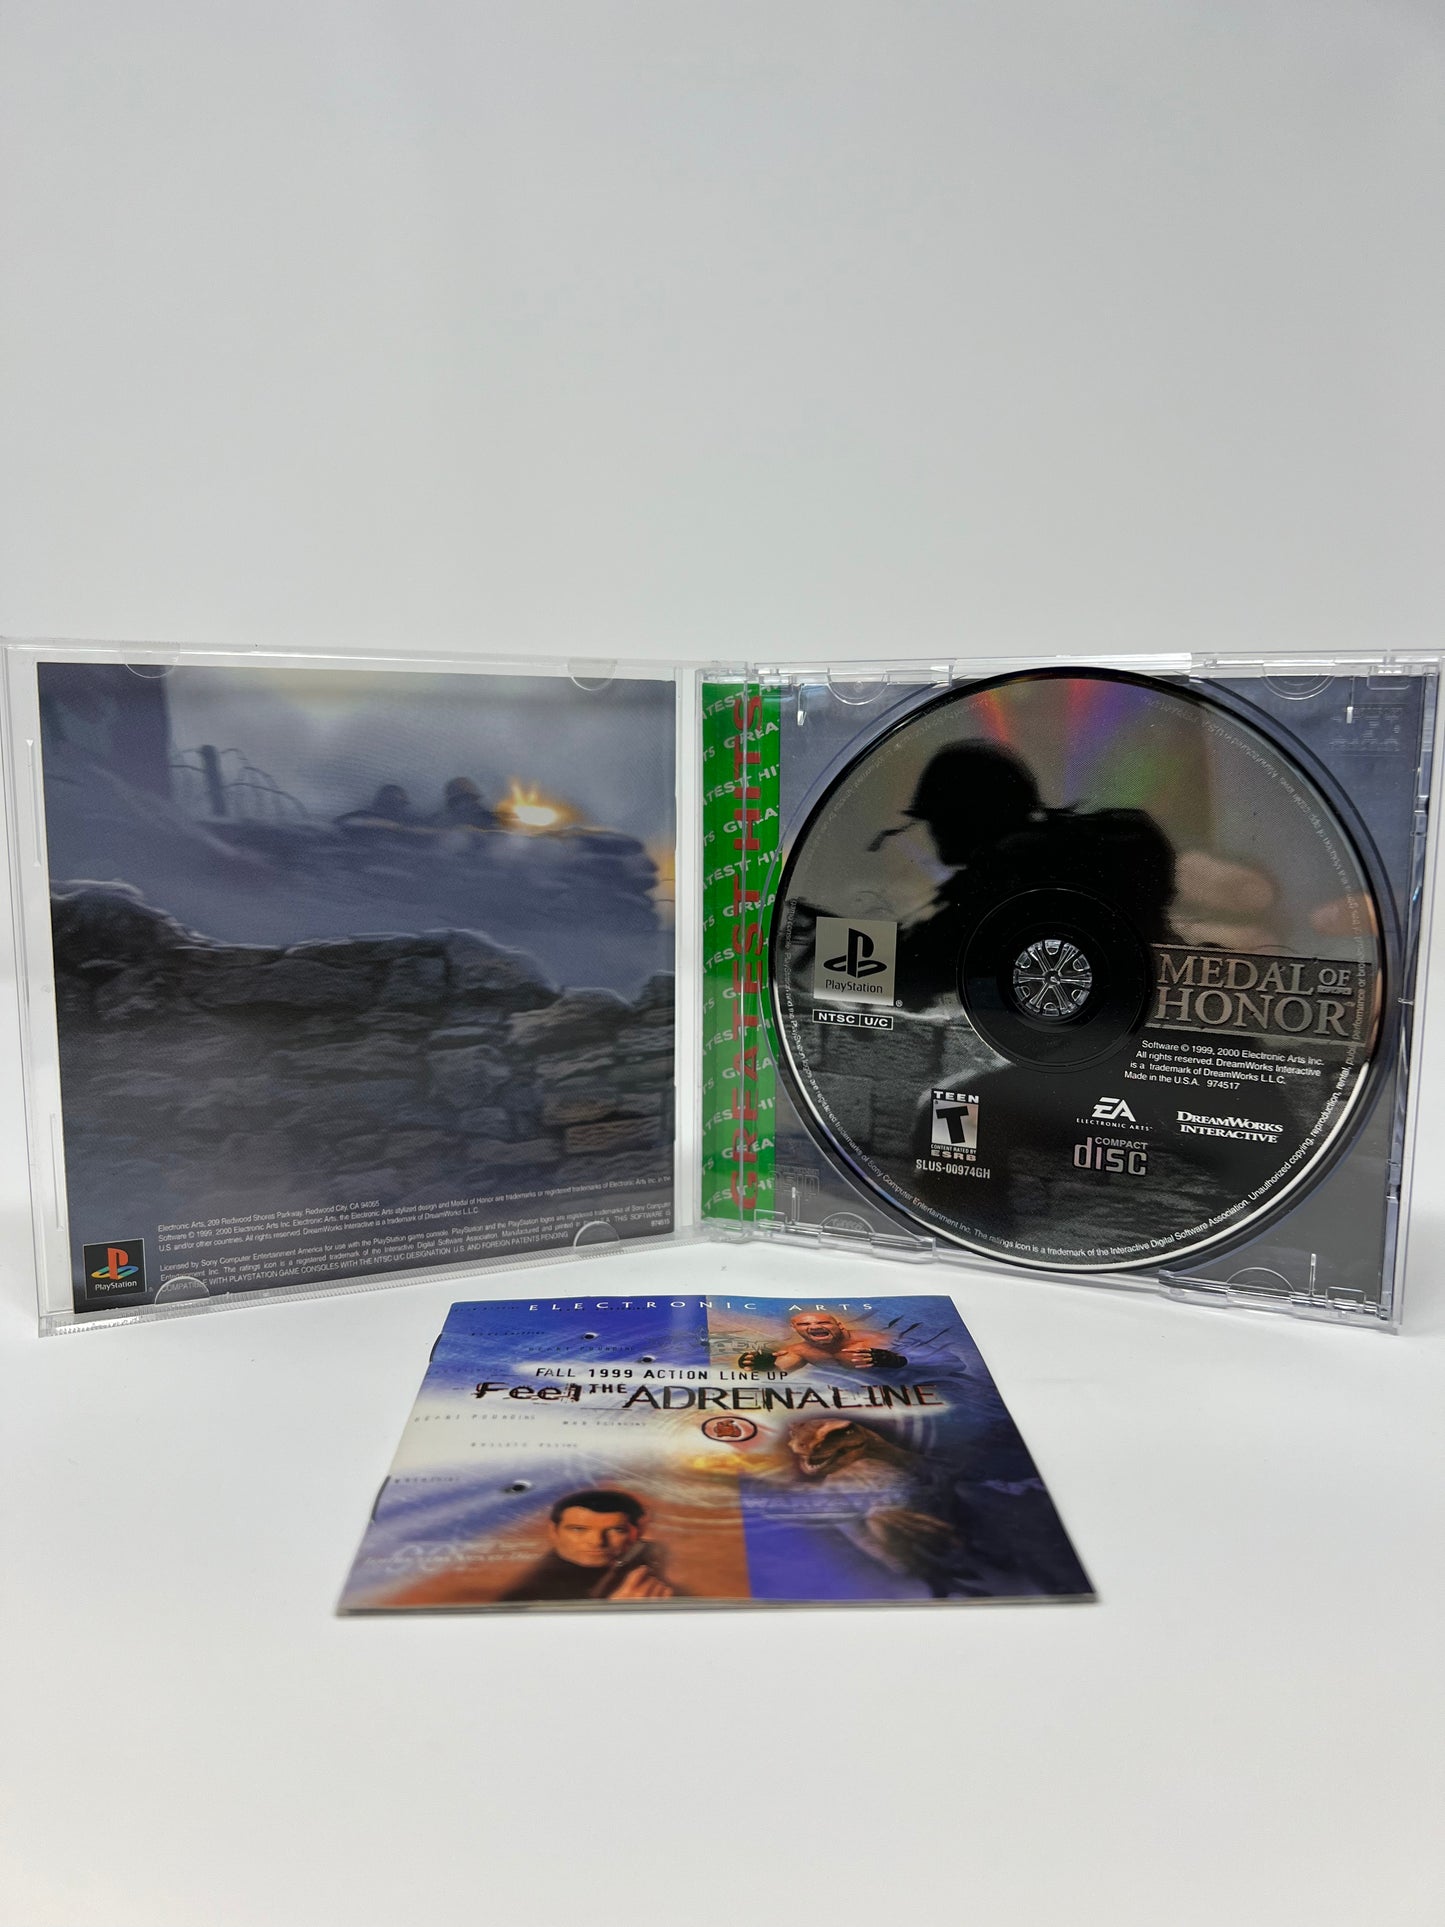 Medal of Honor (Greatest Hits) - PS1 Game - Used